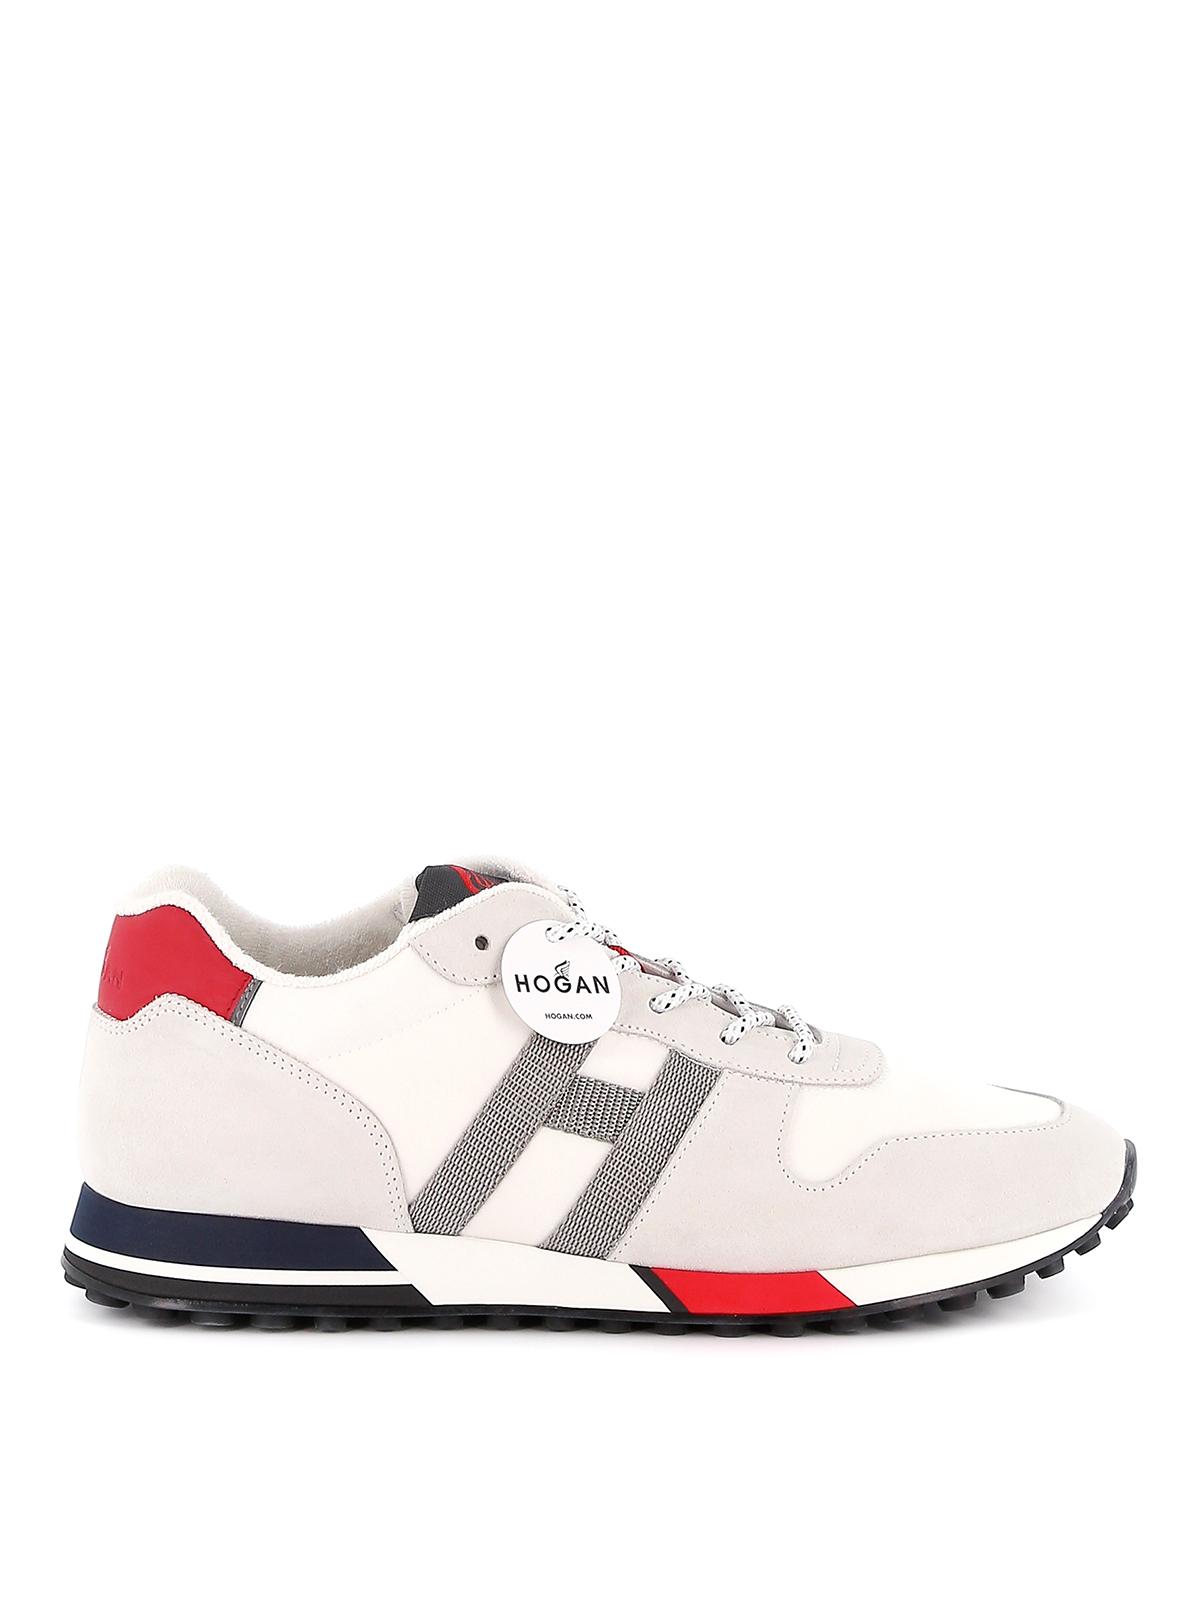 Hogan Suede H383 Retro Running Sneakers in White for Men - Lyst